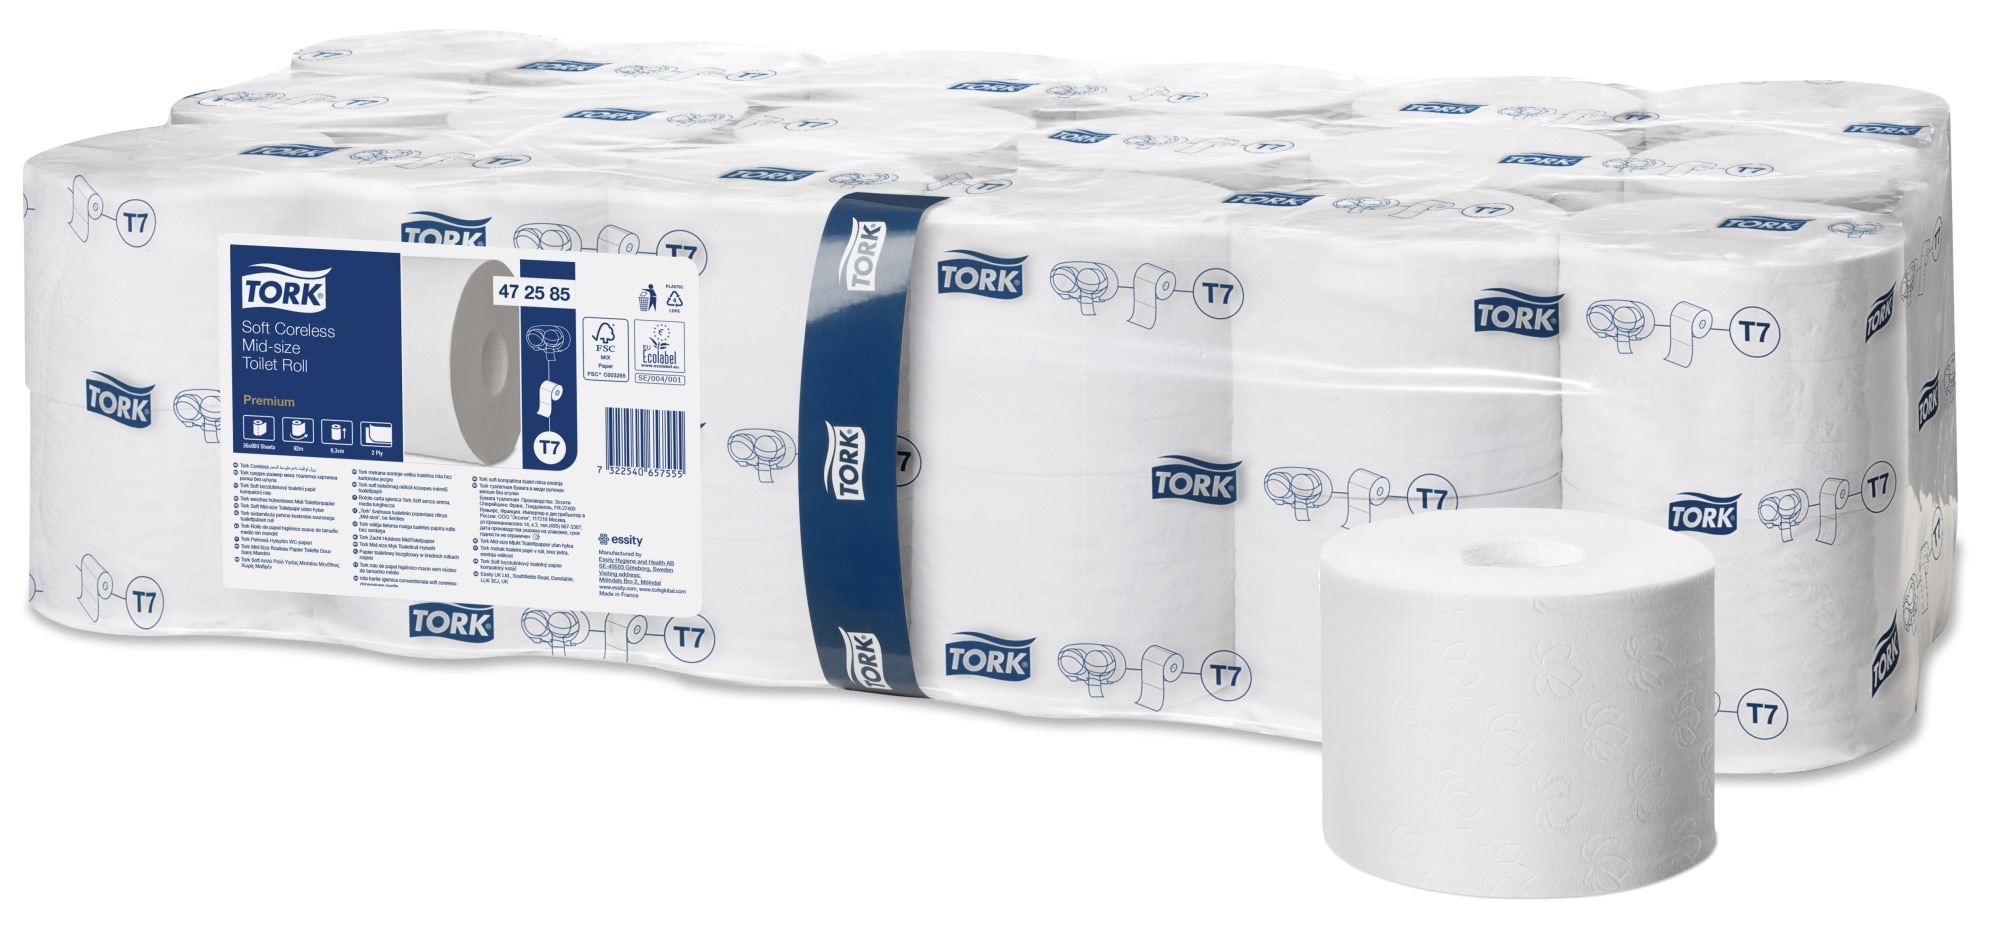 Pack of 27 Tork Soft Mid-Size Toilet Roll 127520 